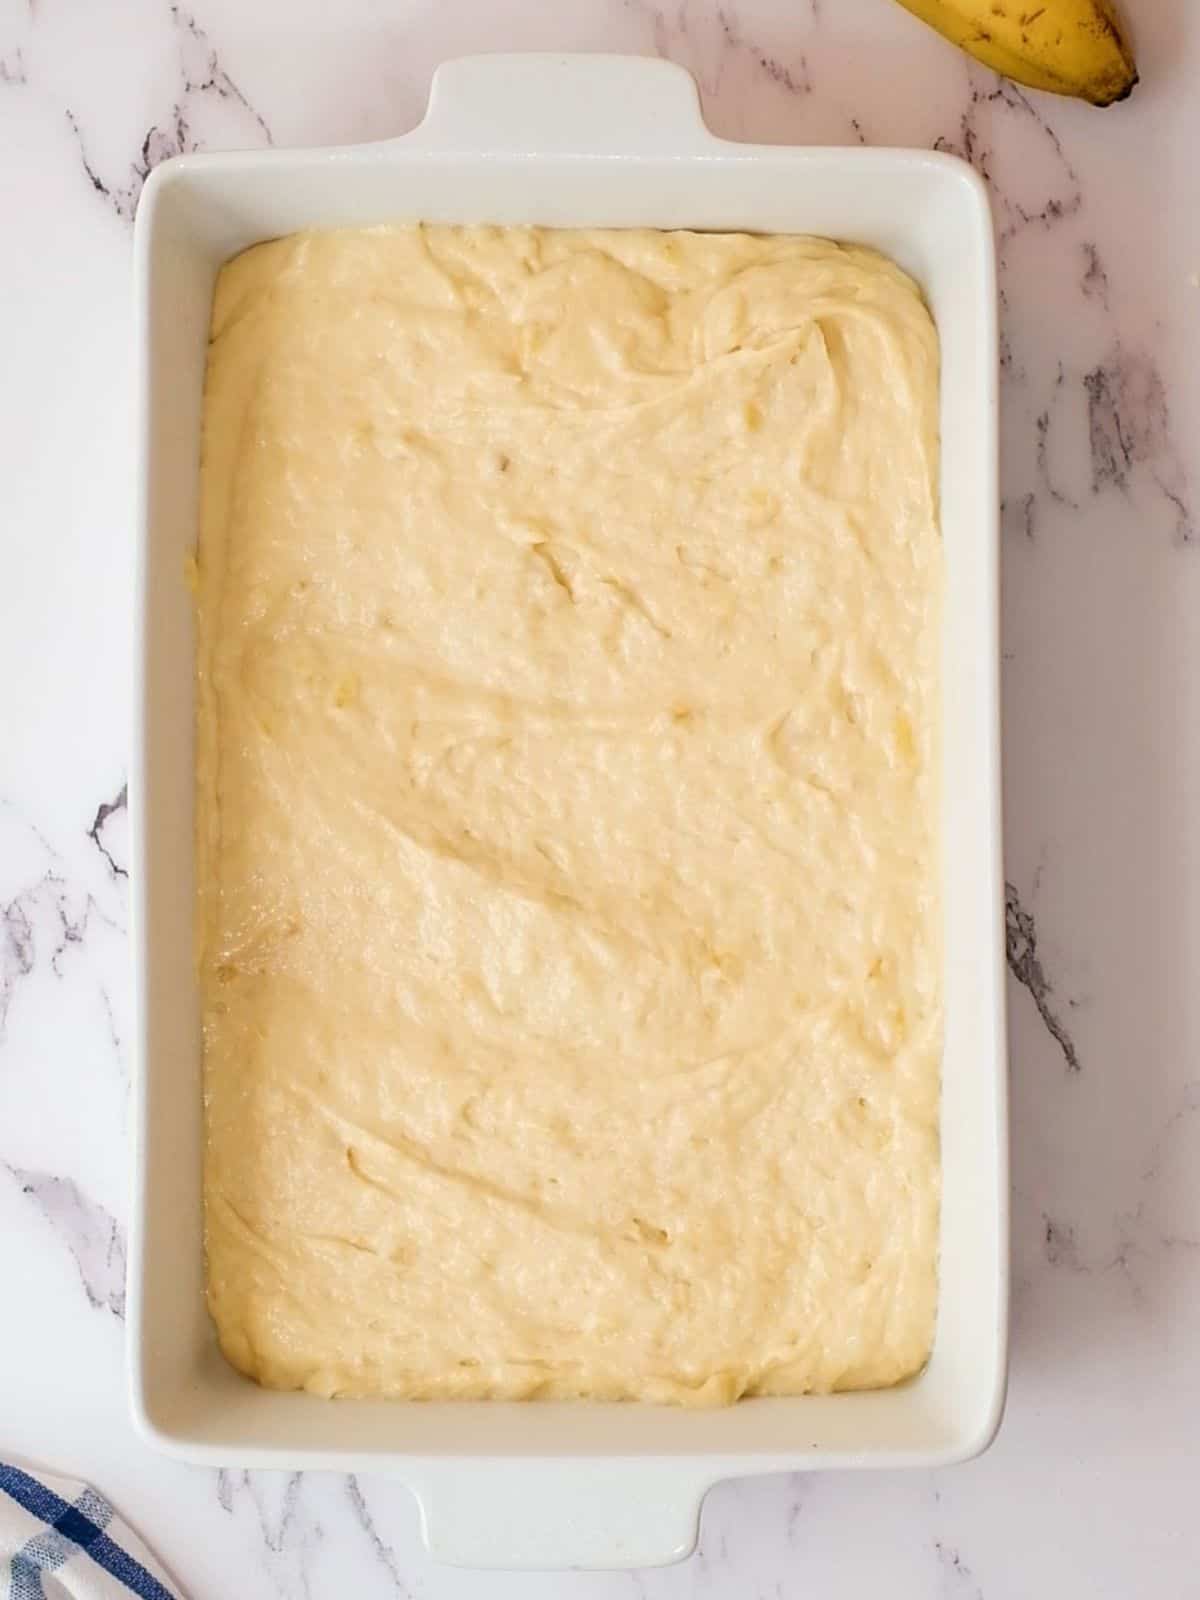 Banana Cake Batter spread out in a 9x13 white baking dish.